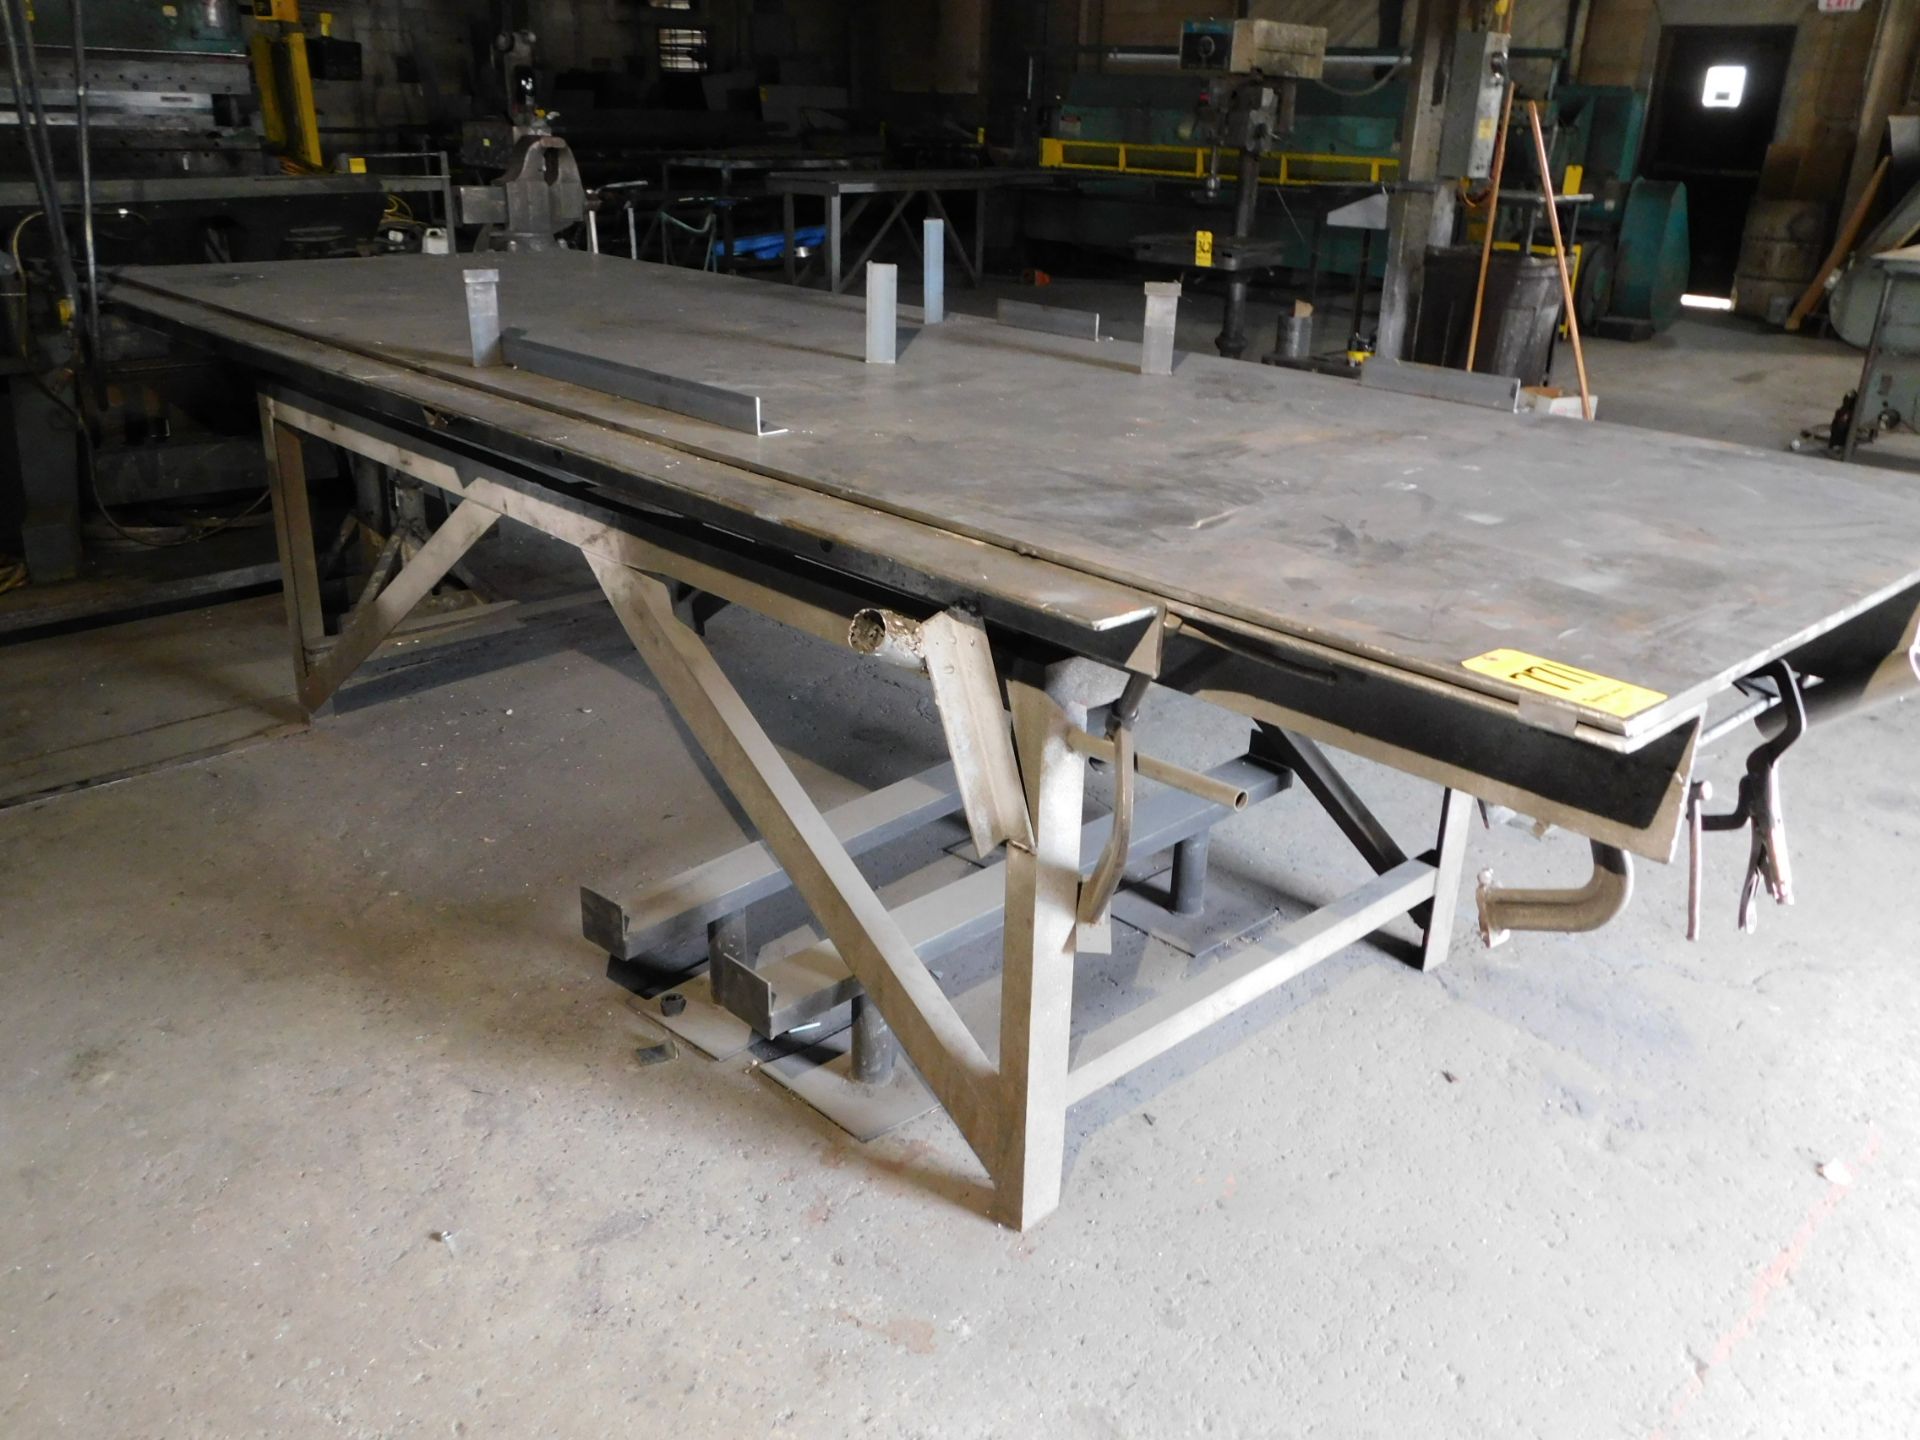 Steel Welding Table with Bench Vise, 4' X 12' X 39" High, 1/2" Top